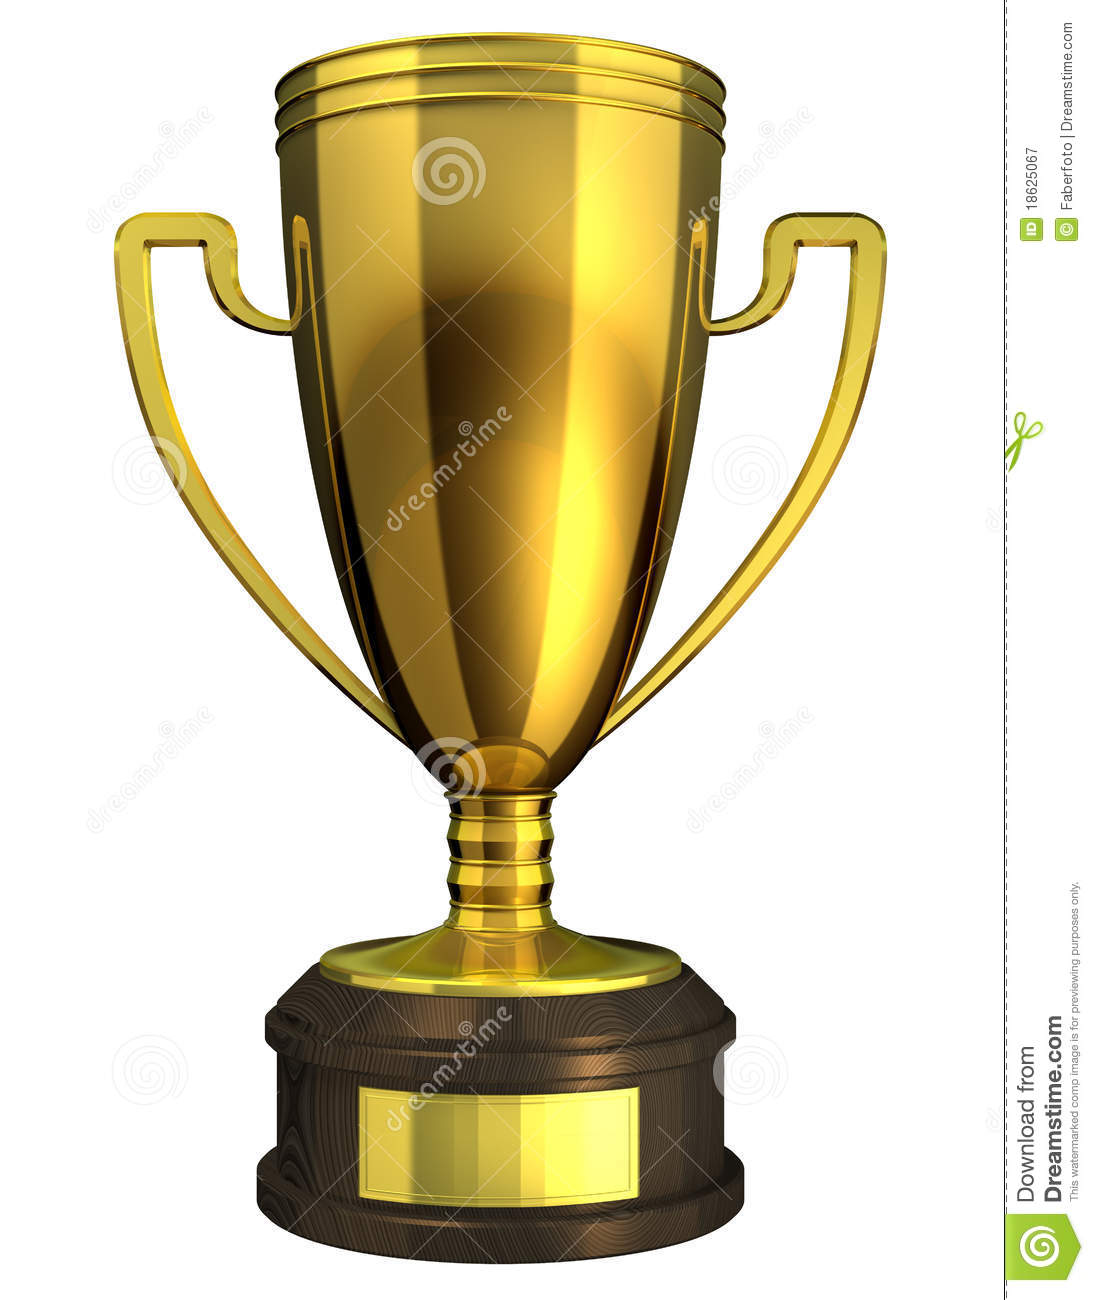 Gold Cup Award   3d Rendered Image Of A Trophy Isolated On Whote